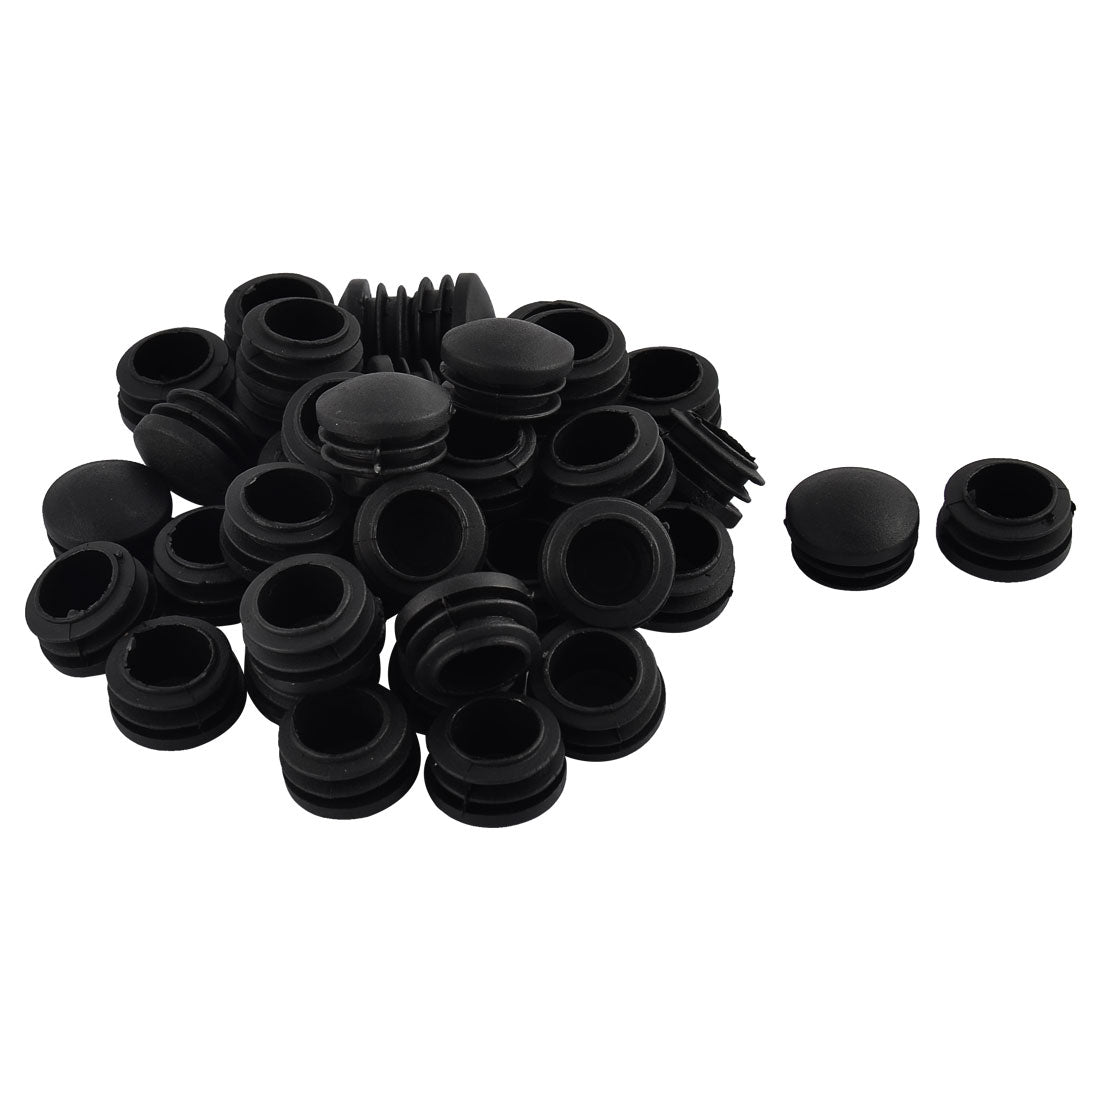 uxcell Uxcell Furniture Table Chair Legs Plastic Round Head Tube Pipe Insert Cap Cover Black 25mm Dia 40pcs